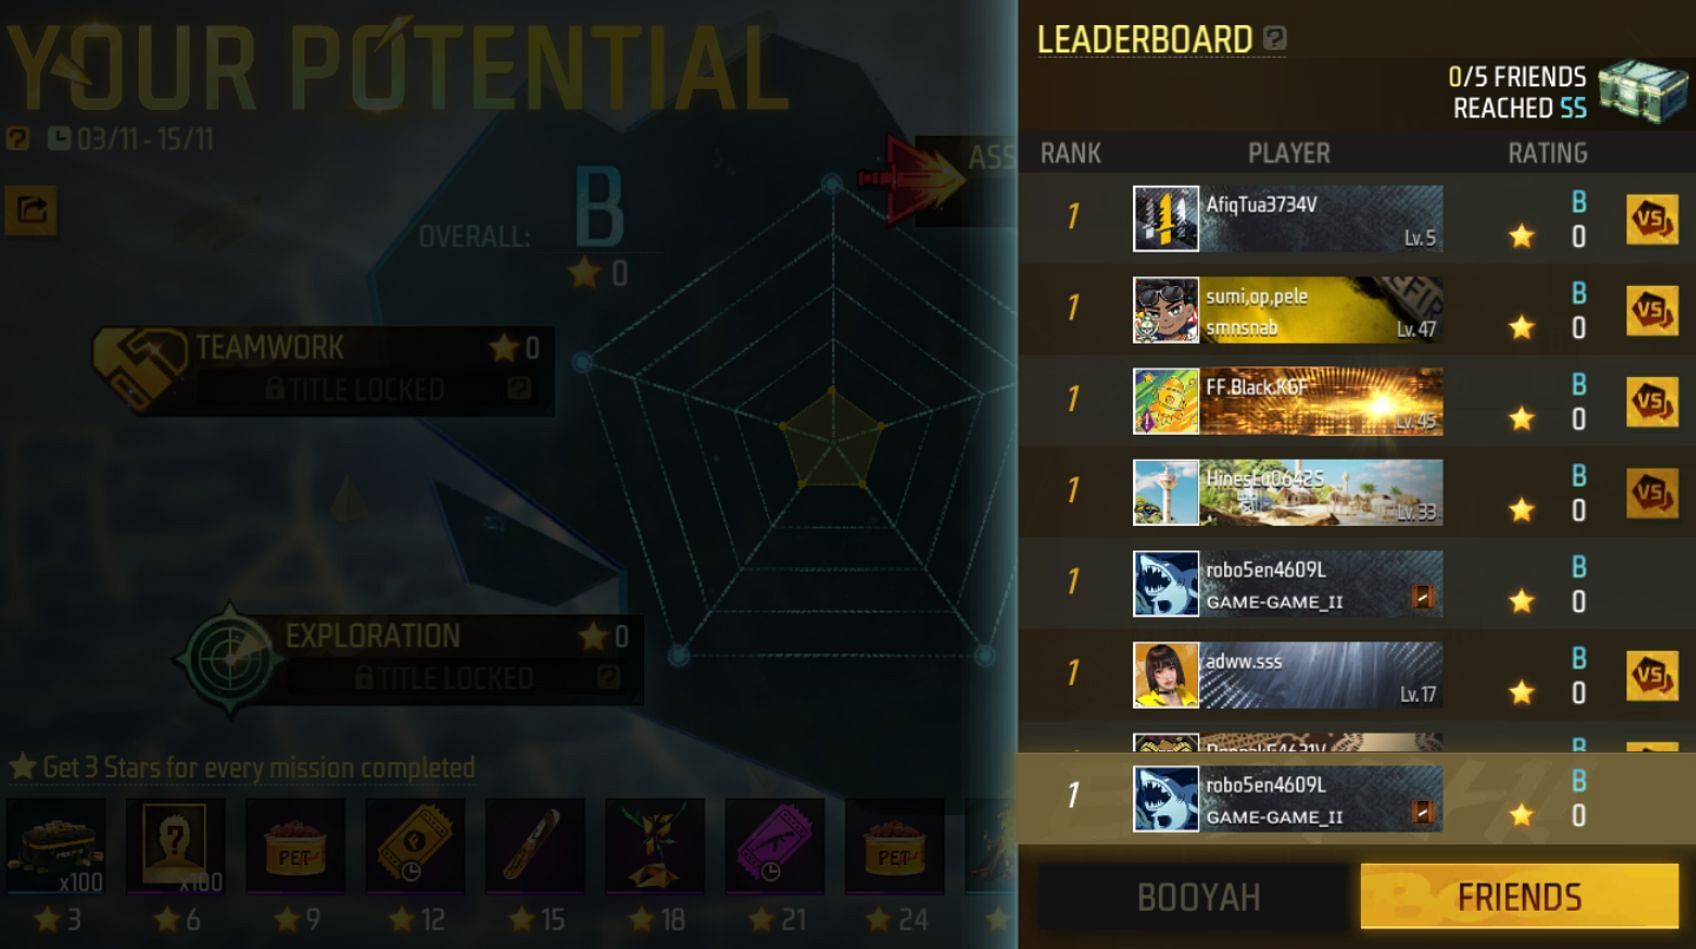 You can grab free rewards after your friends reach SS rating in Your Potential Missions (Image via Garena)